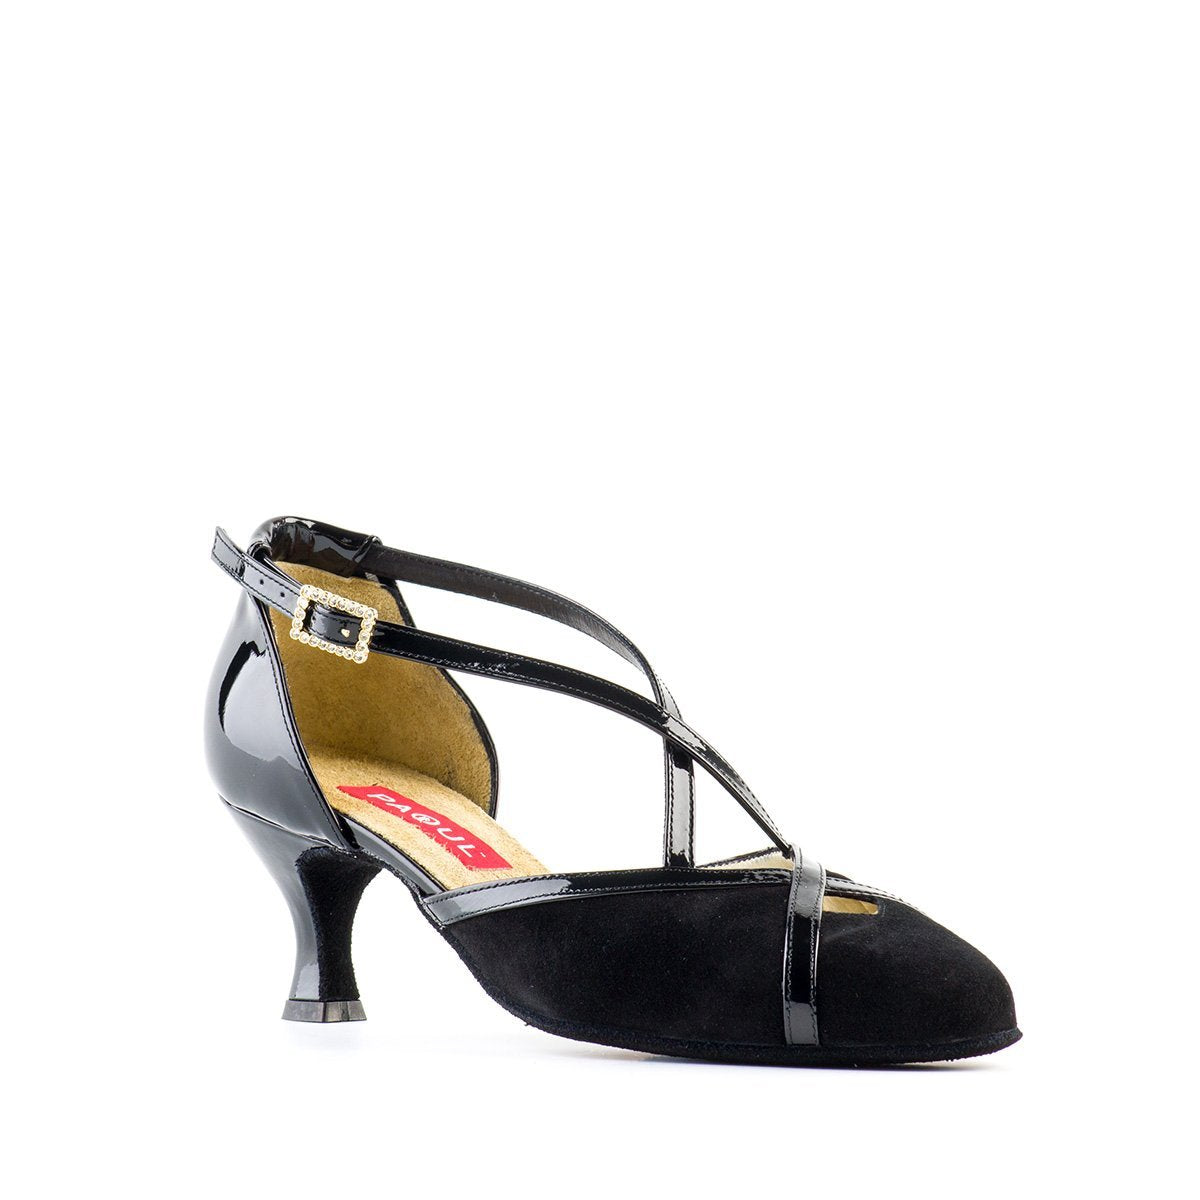 Black suede and patent tango dance shoe for women